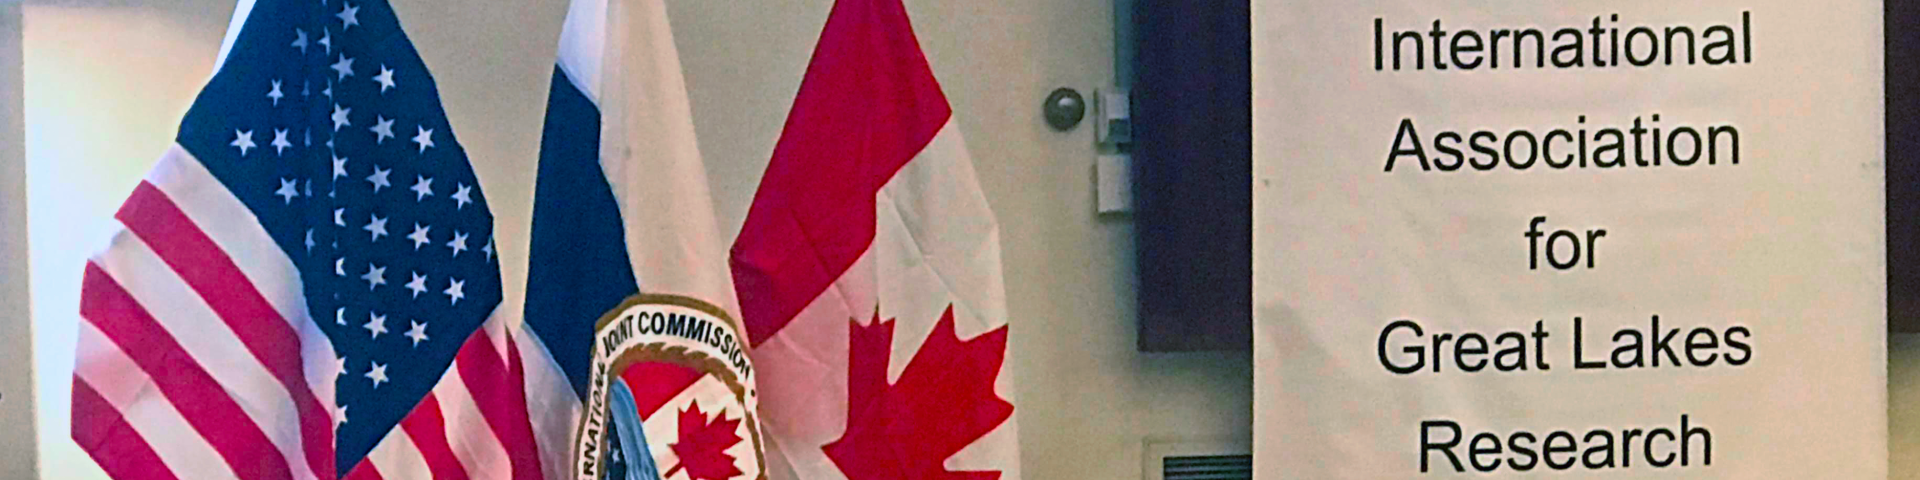 Image of US, Canadian and IJC flag at IAGLR conference in 2019